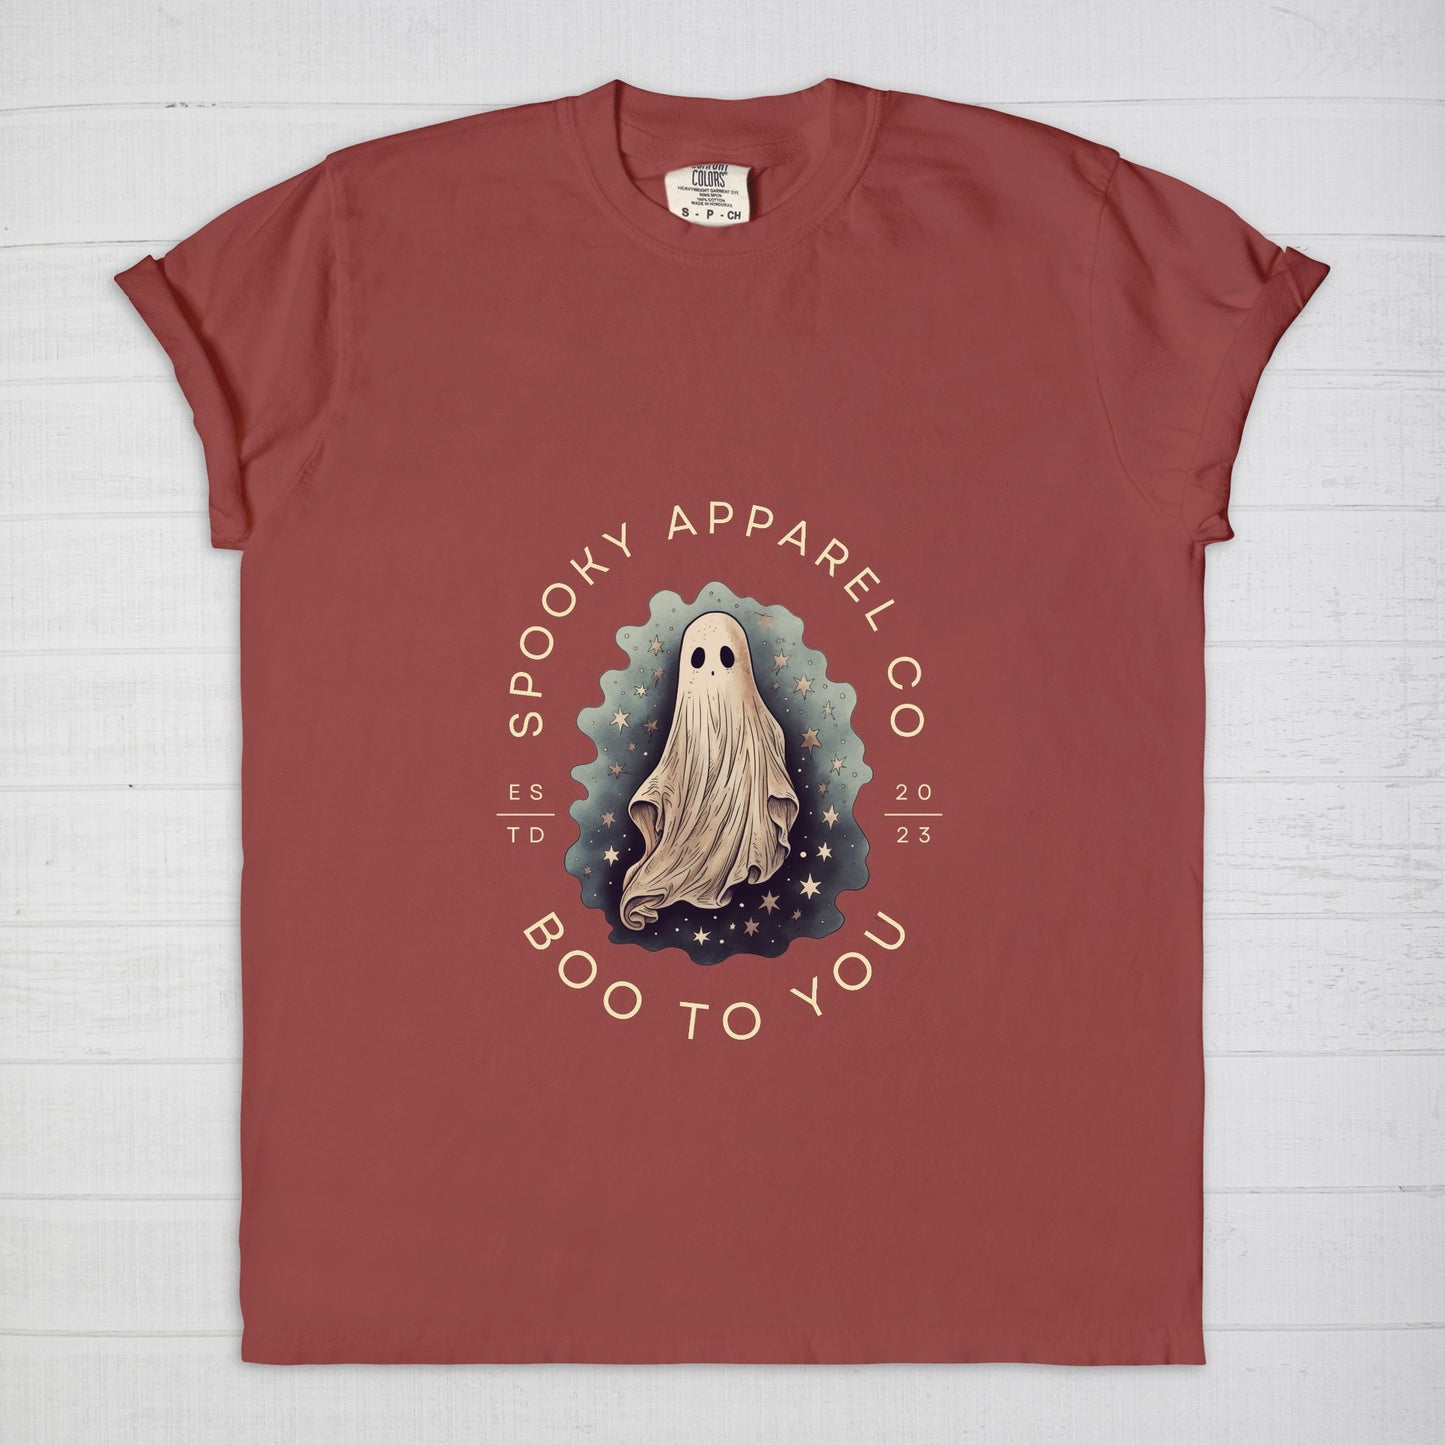 Spooky Apparel Co - Boo To You - Comfort Color Tee